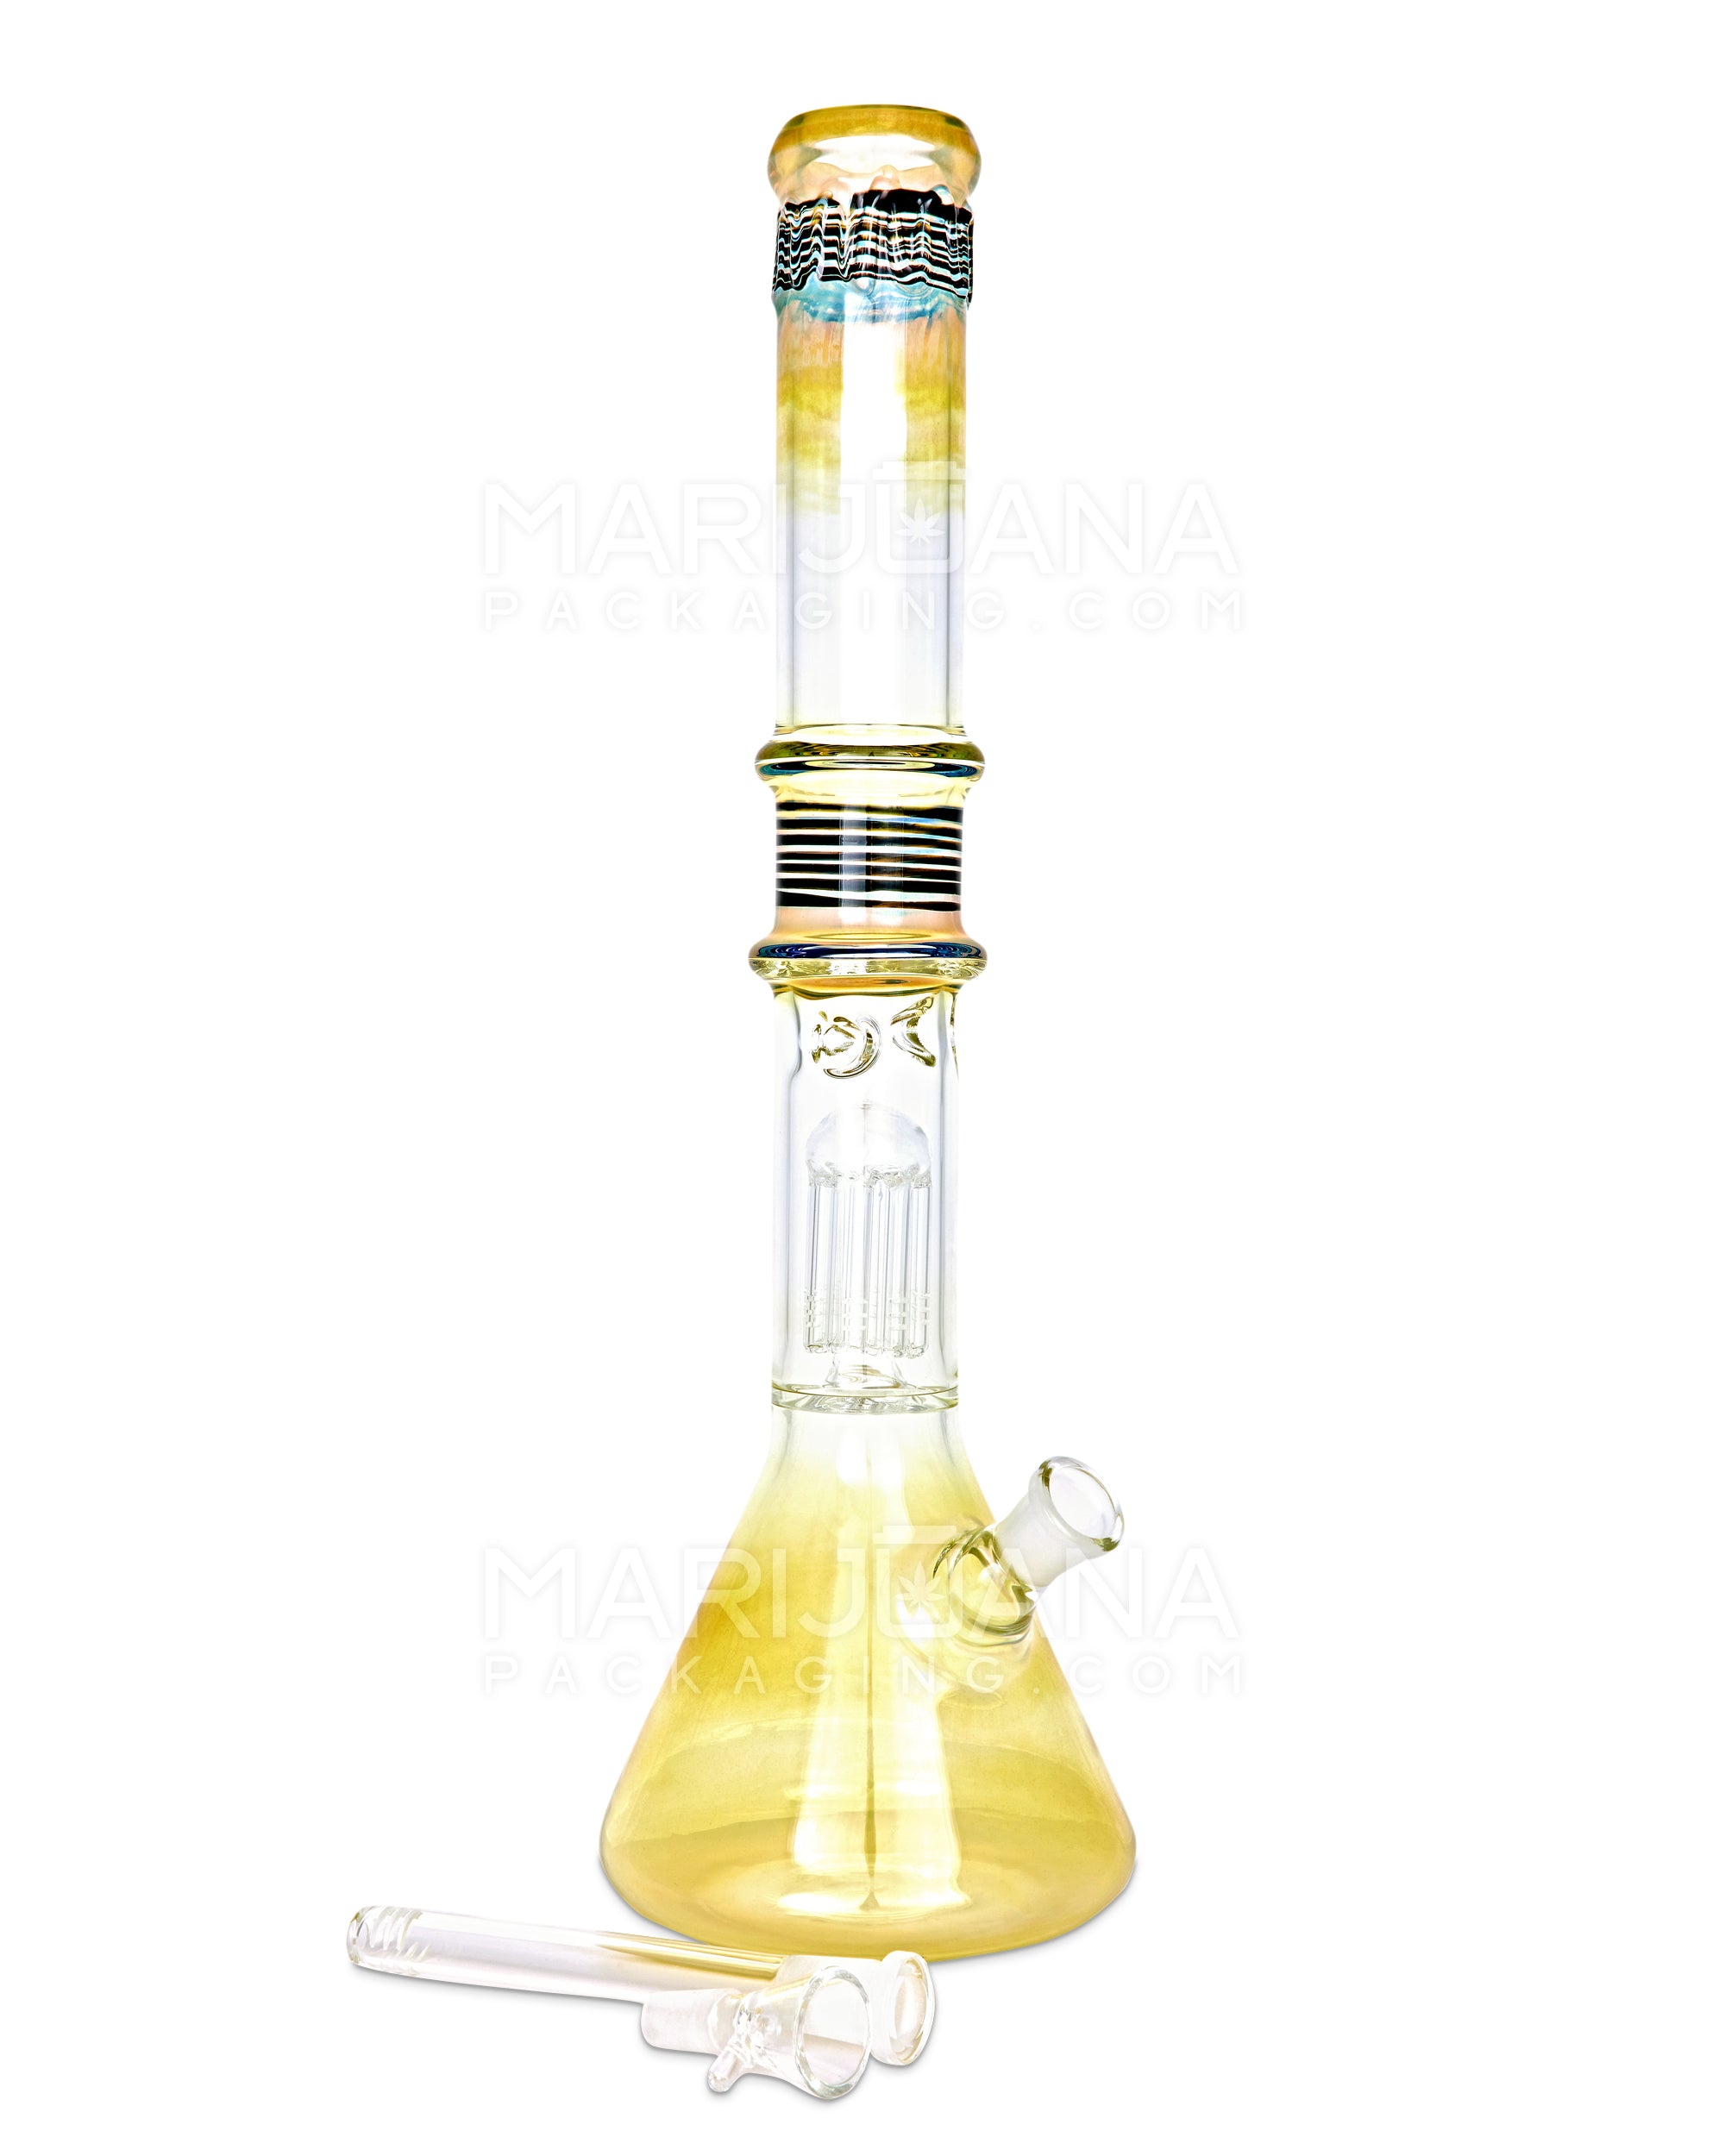 USA Glass | Straight Neck Tree Perc Fumed Glass Beaker Water Pipe w/ Ice Catcher | 18in Tall - 18mm Bowl - Black - 2